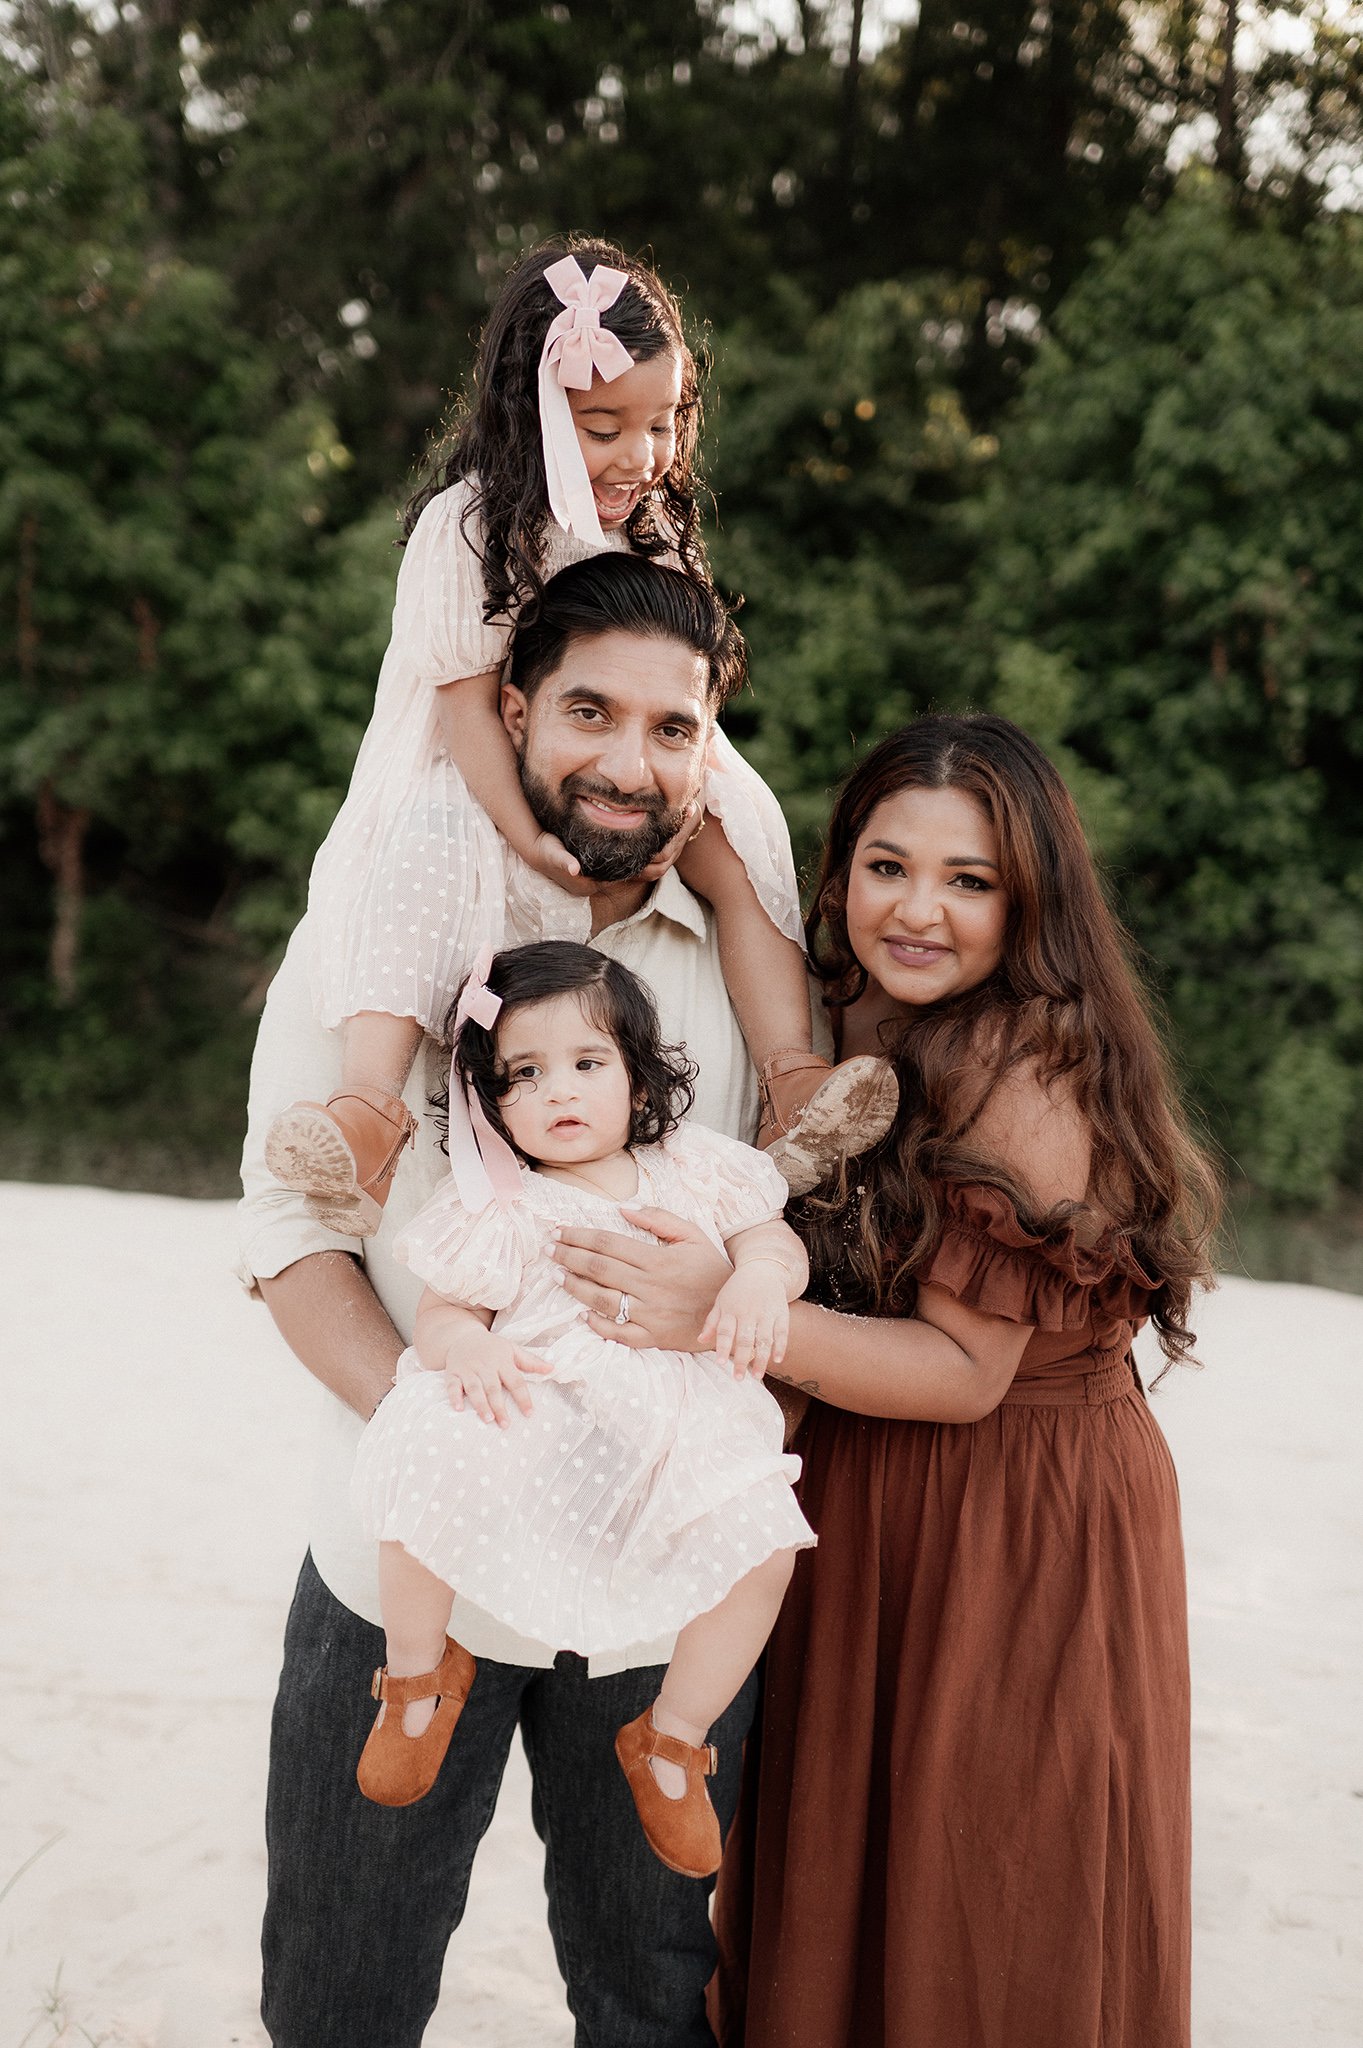 the woodlands family photographer _ conroe photographer _ houston family photographer _ ashley gillen photography _ texas family photographer _ conroe wedding photographer _ conroe texas _ cshi47.jpg